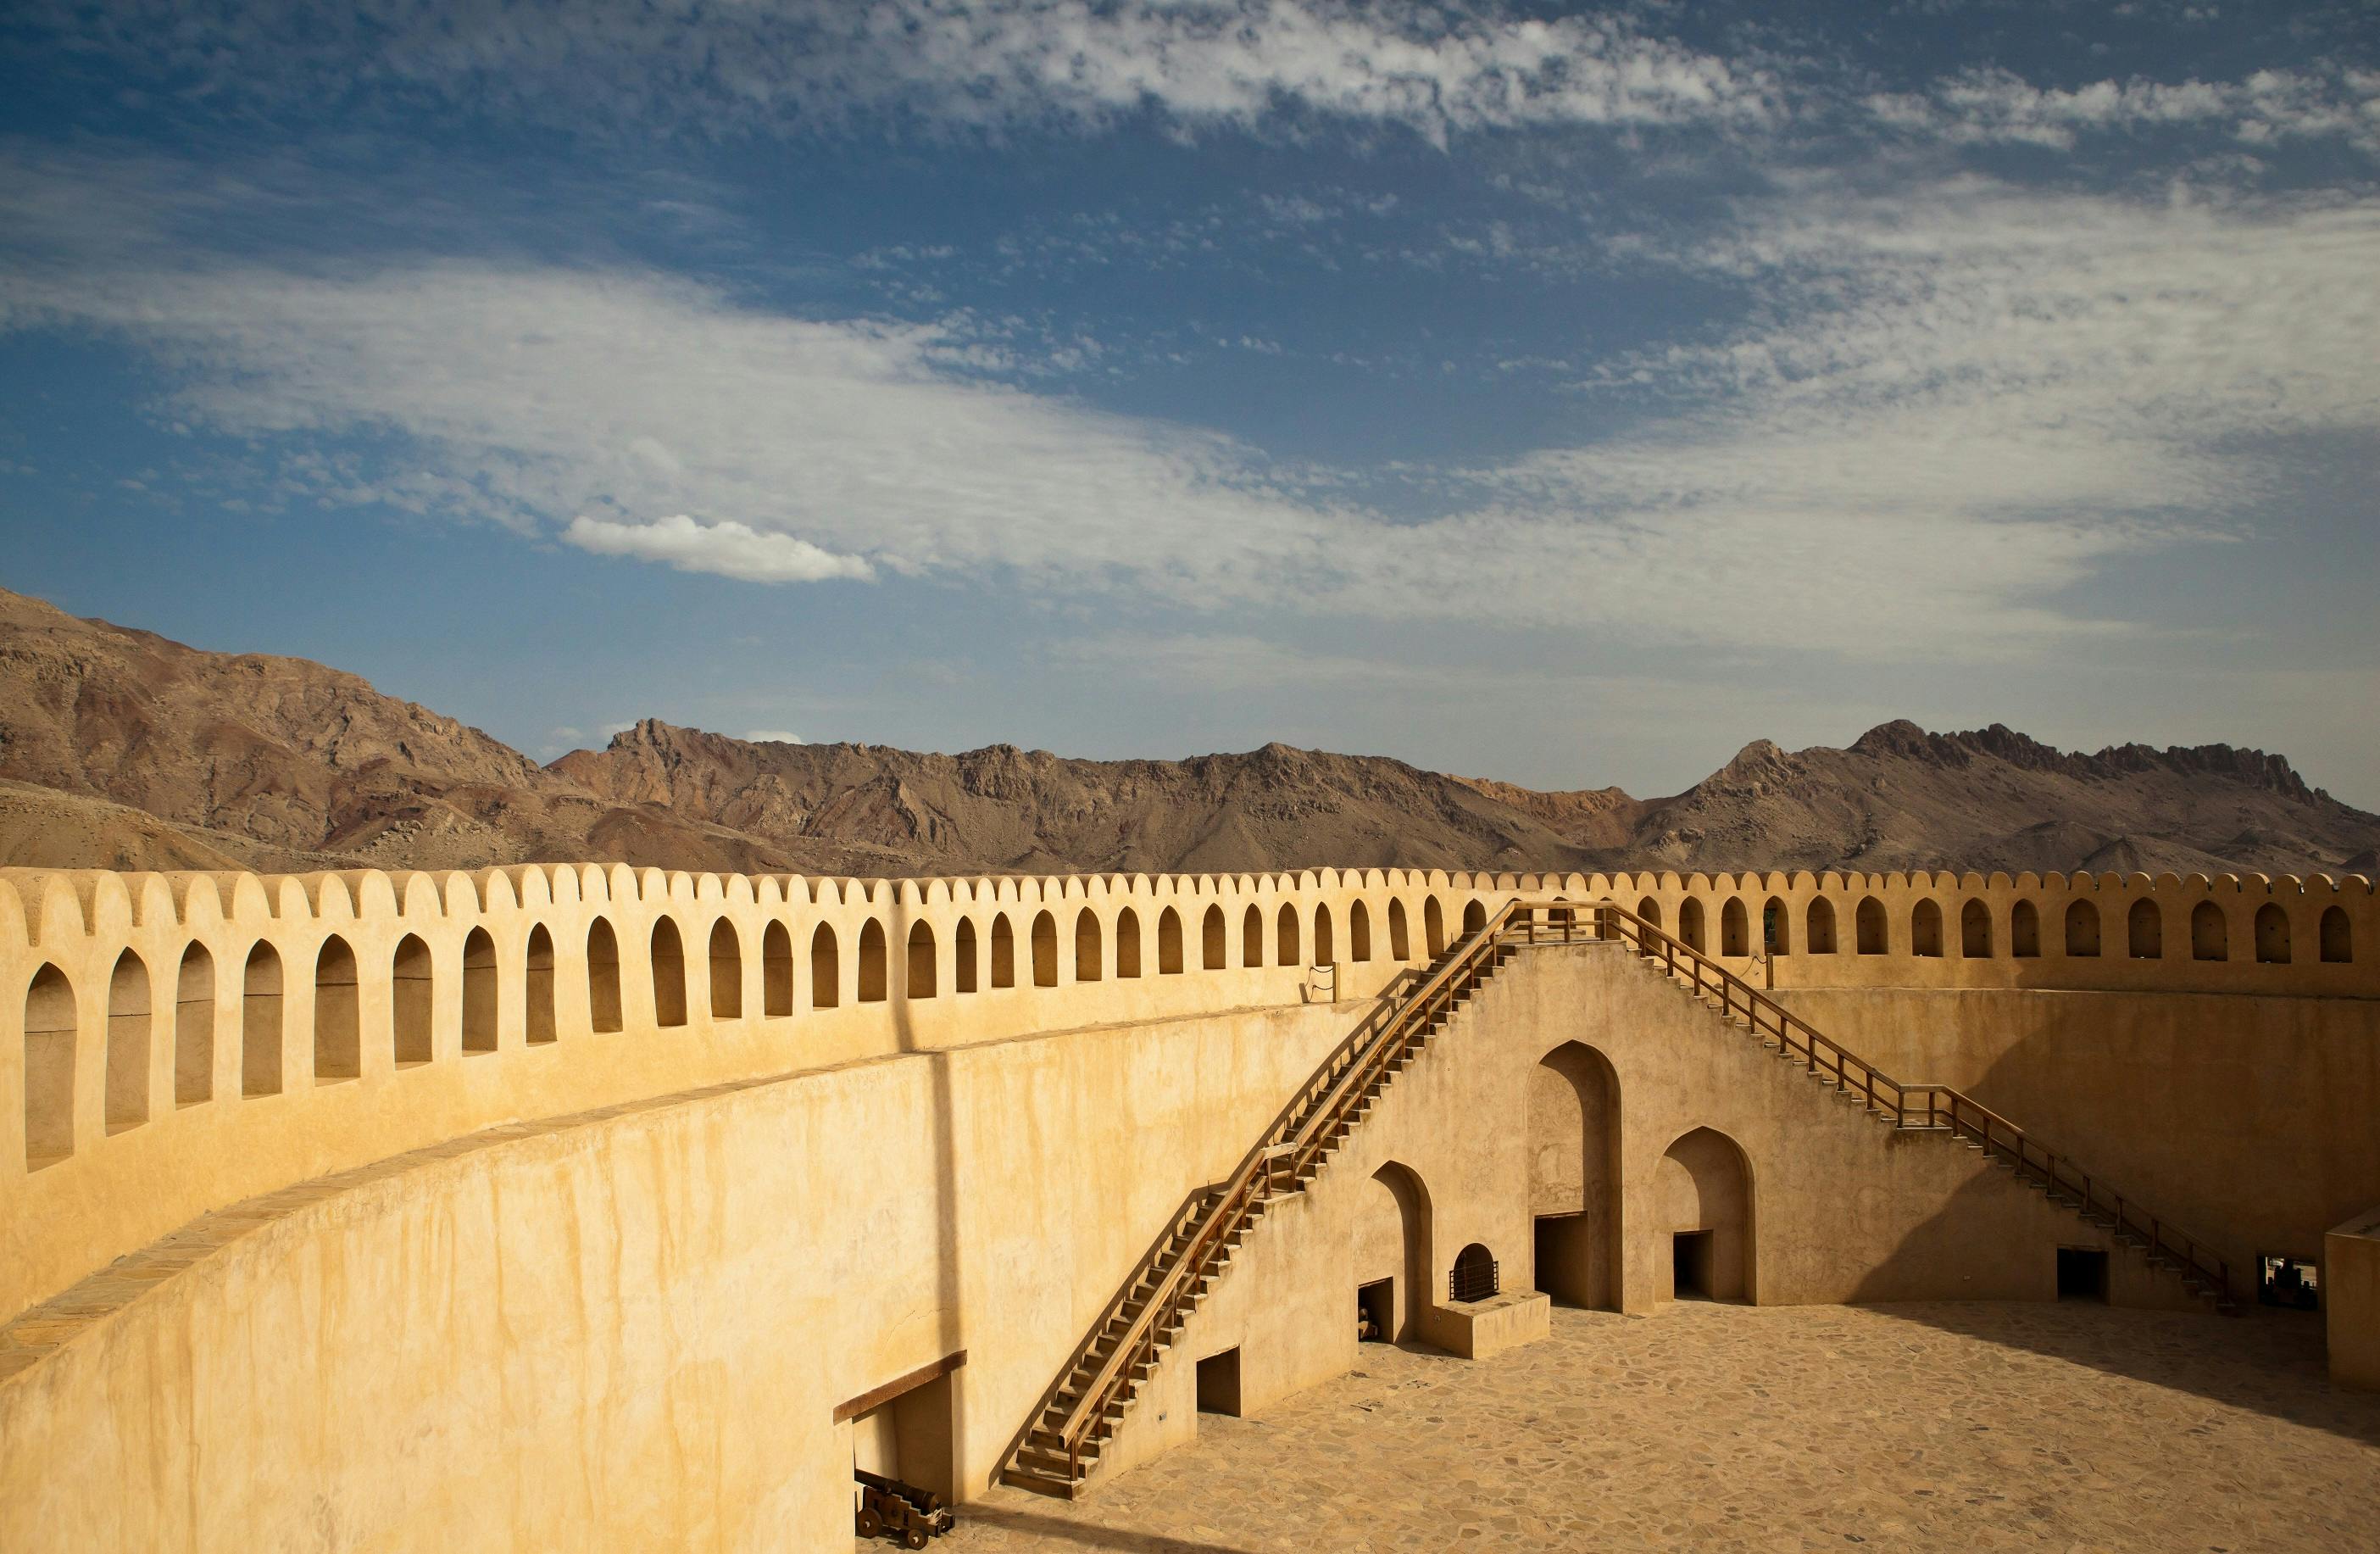 Full day tour to Nizwa including Bahla and Jabrin forts Musement